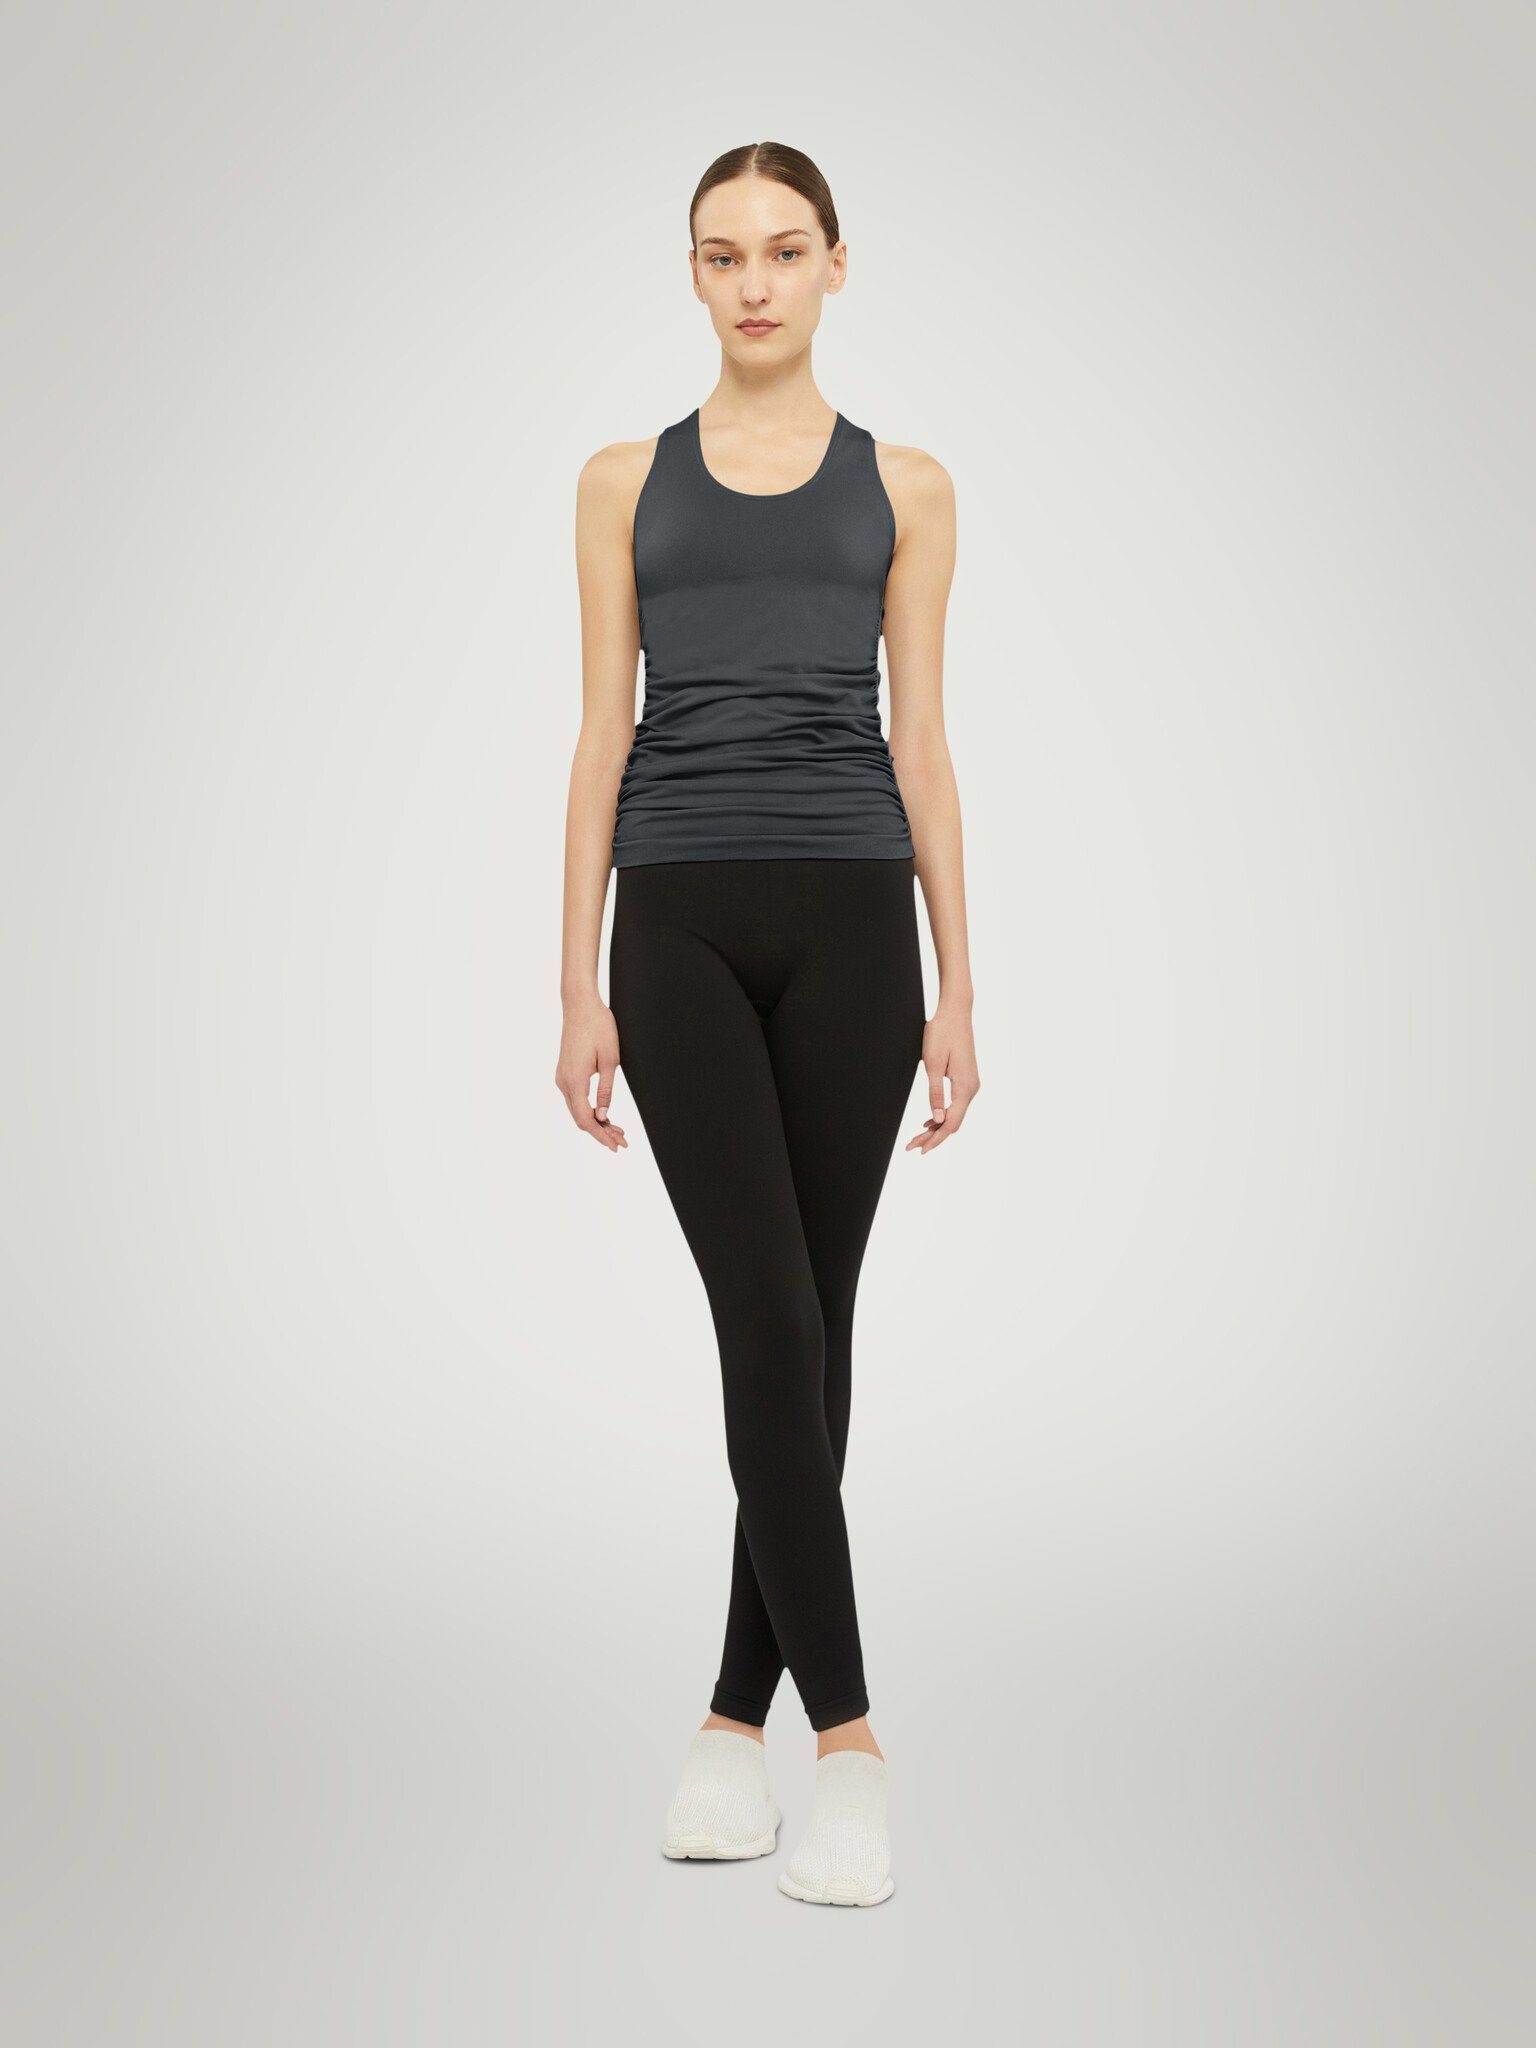 WOLFORD 57159 Body Shaping Top Sleeveless